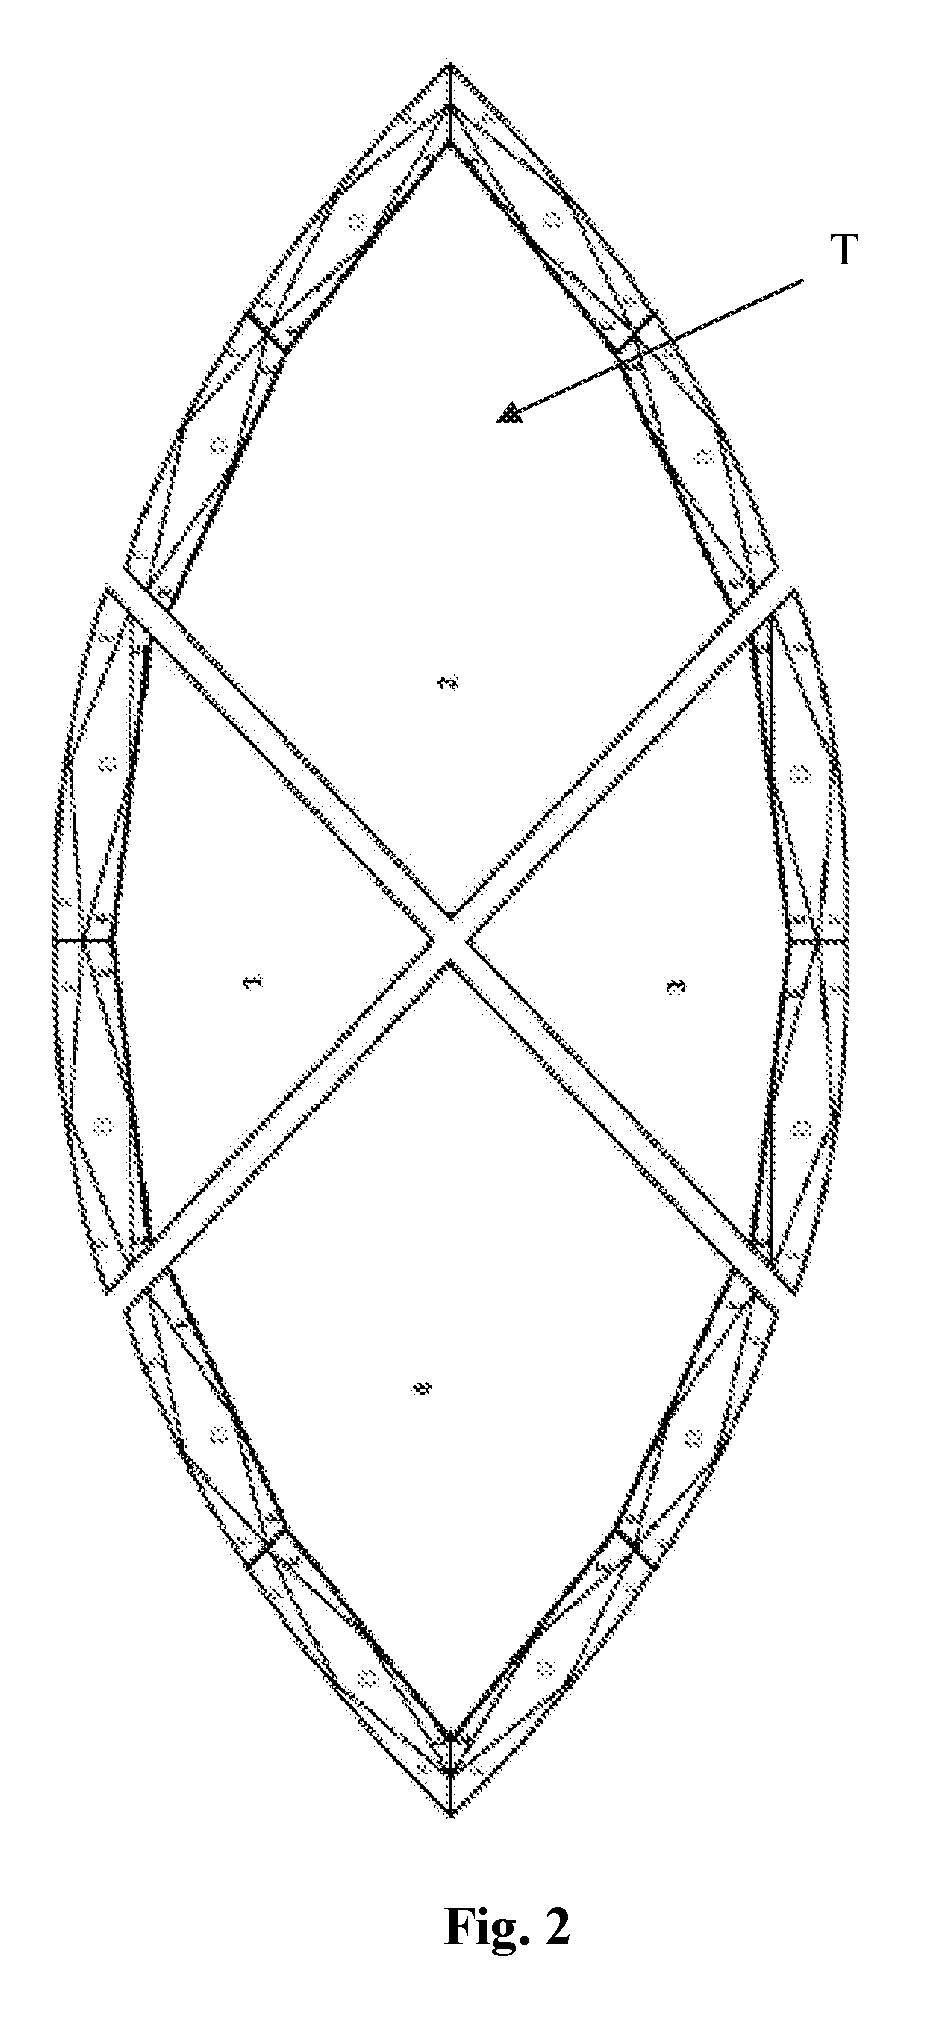 Process of cutting and assembling diamonds to form composite diamond having enhanced brilliance and shade